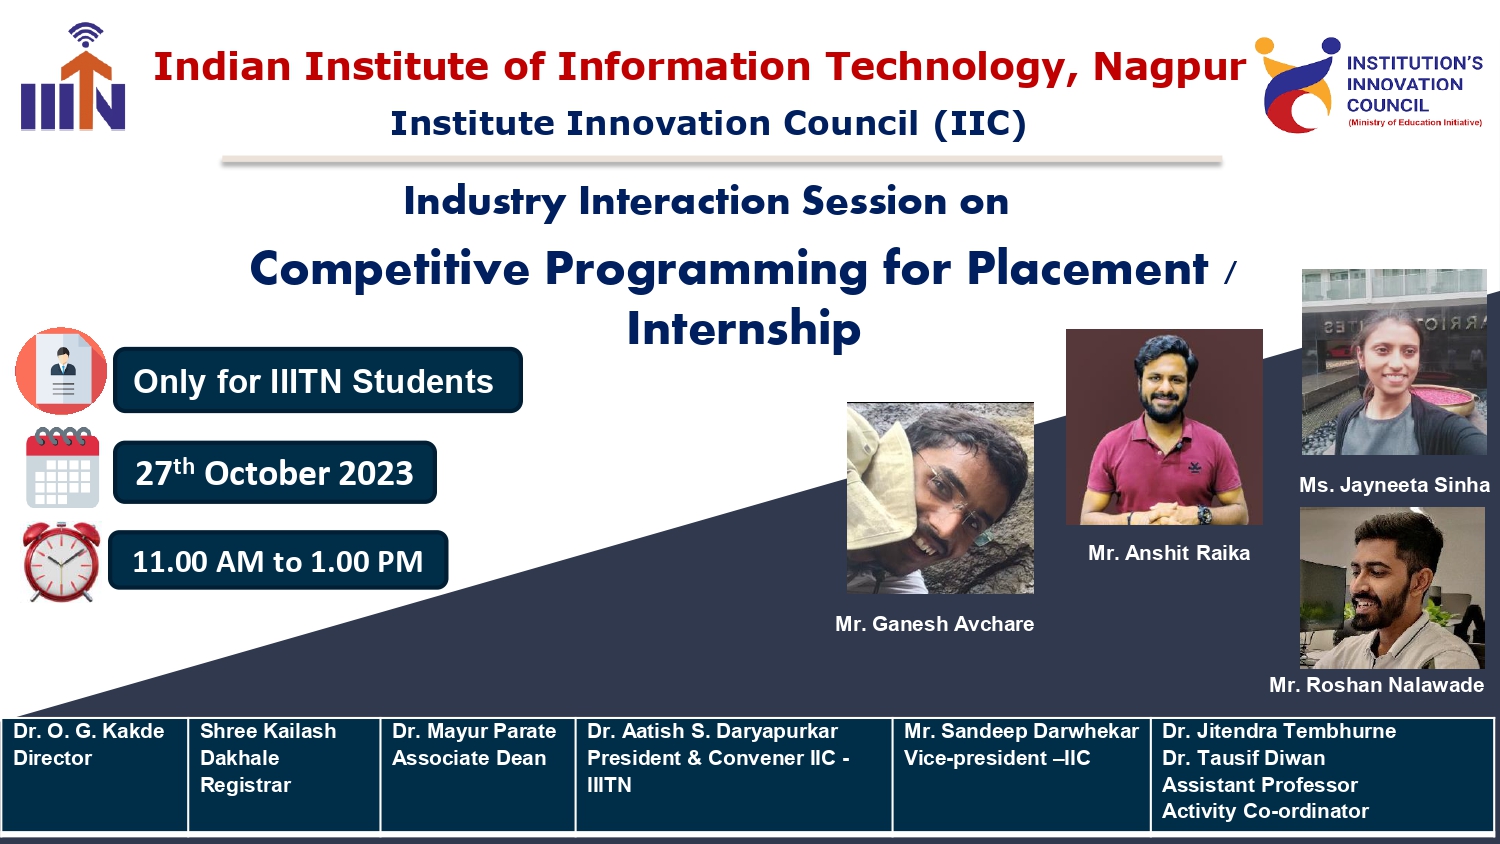 Institute Innovation Council (IIC) Event